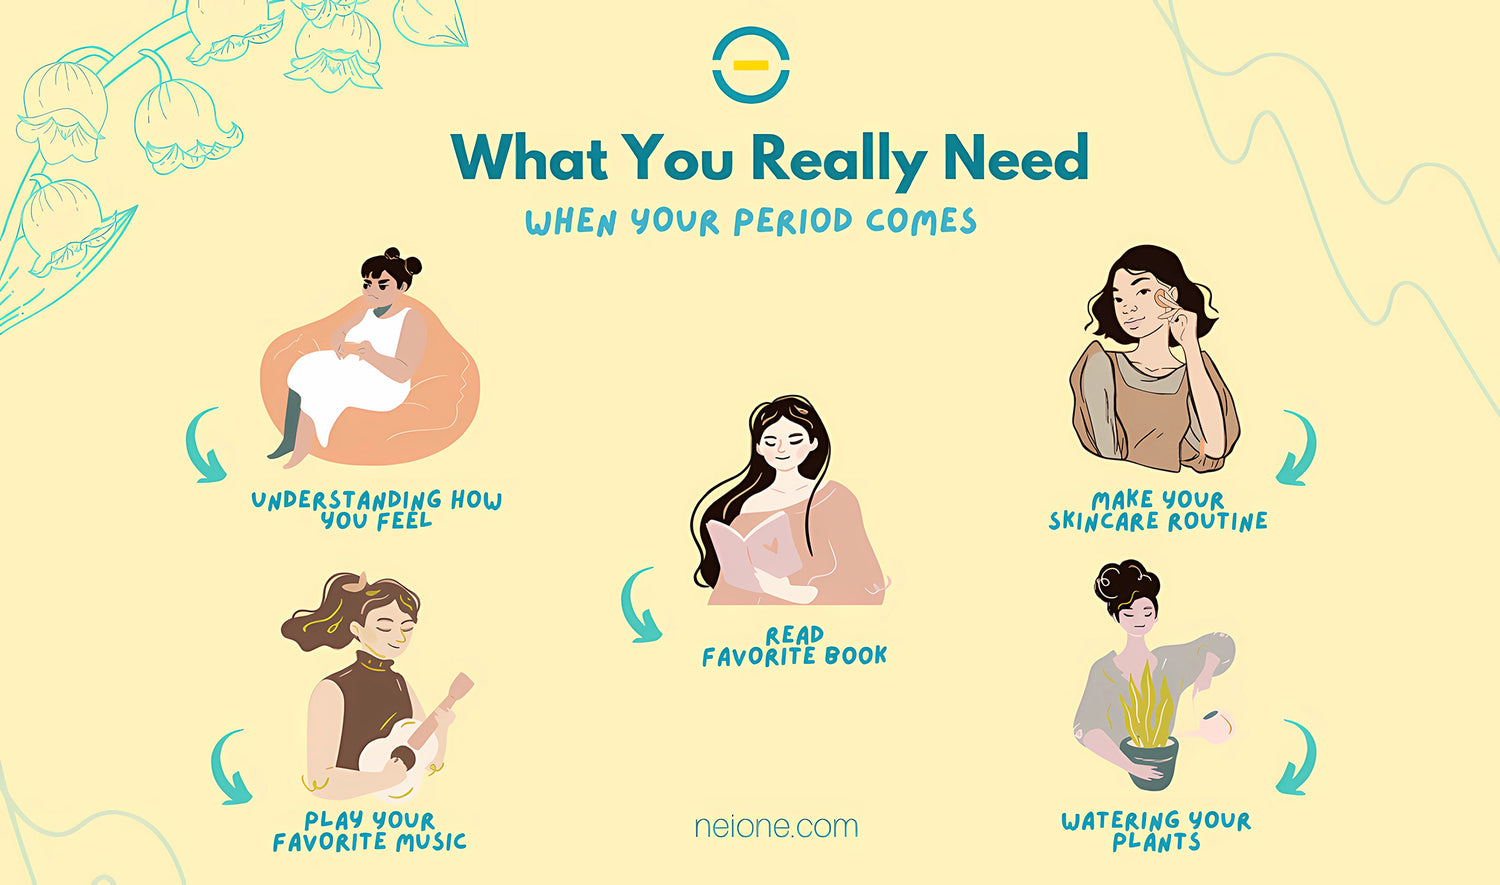 What You Really Need When Your Period Comes: Self-Care Tips for a Happy Period Cycle